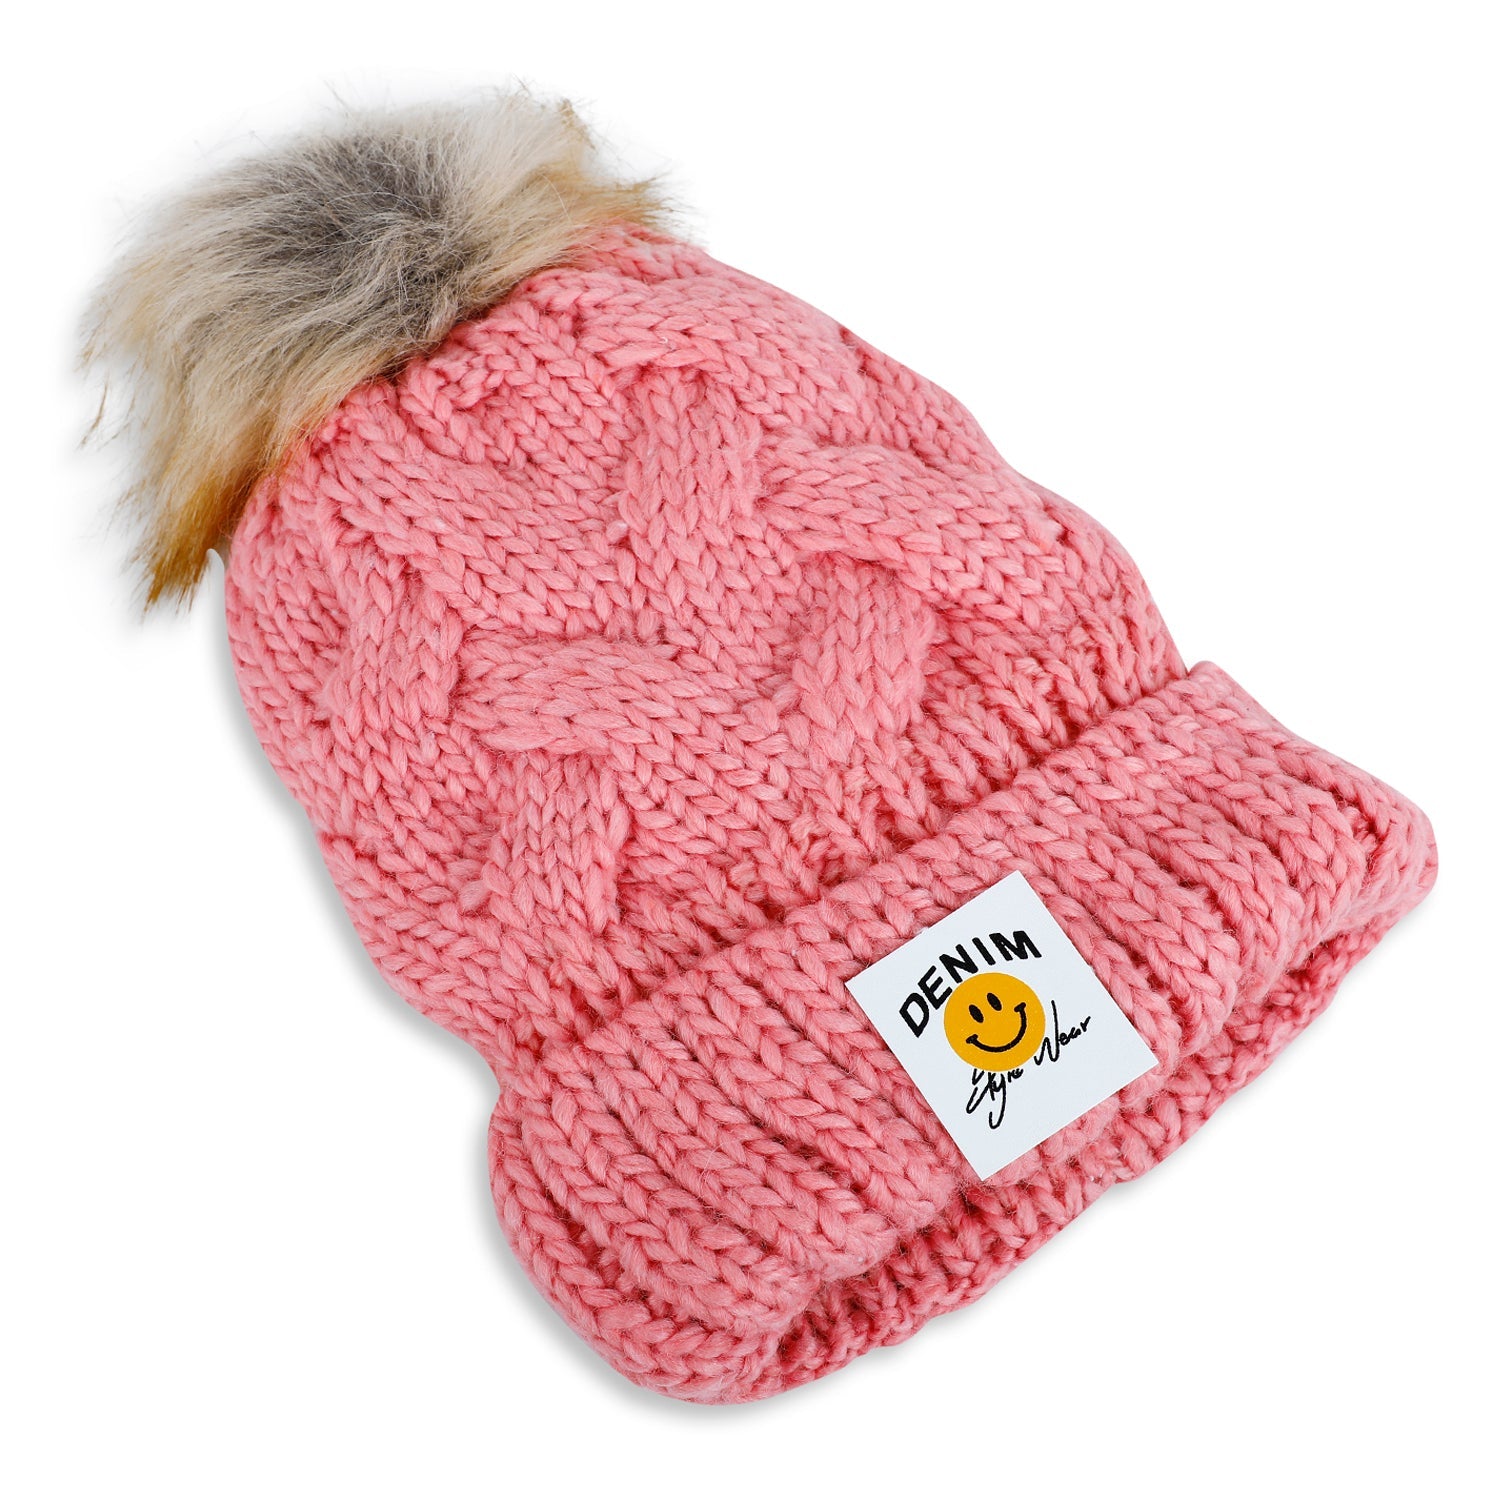 Baby Moo Pom Pom Knitted Woollen Cap - Pink - Baby Moo